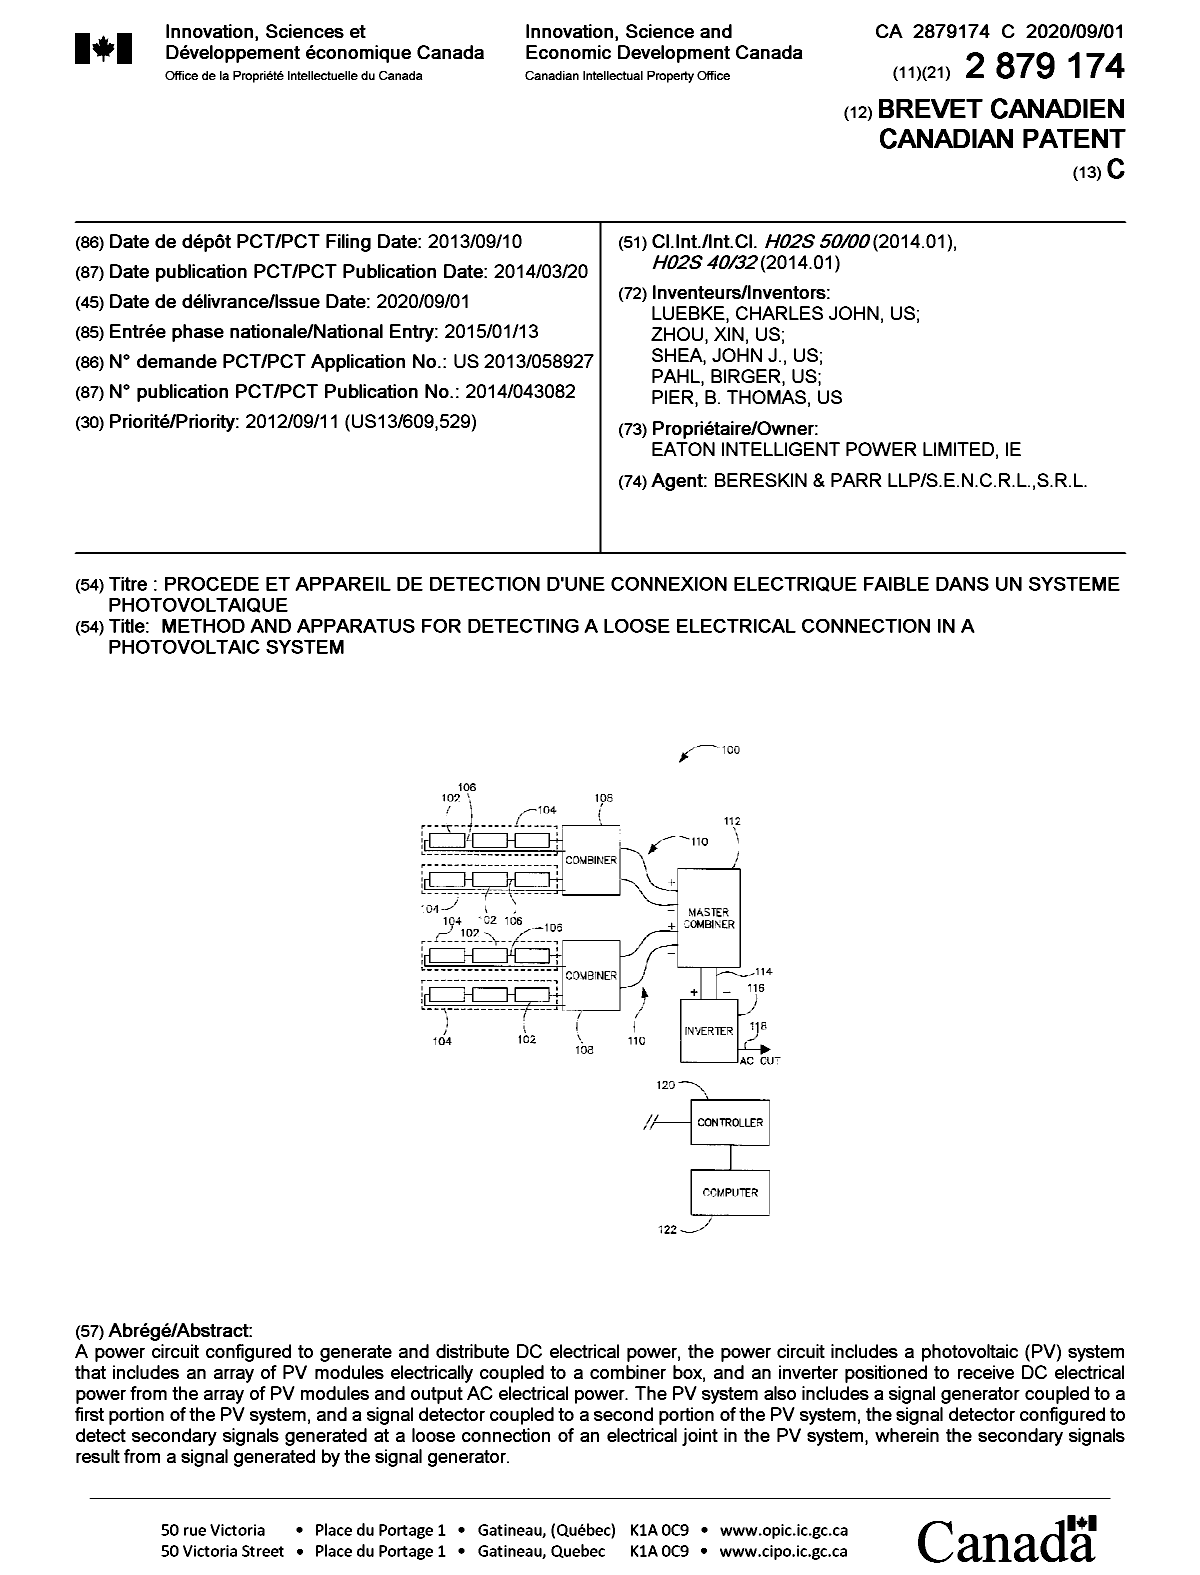 Canadian Patent Document 2879174. Cover Page 20200805. Image 1 of 1